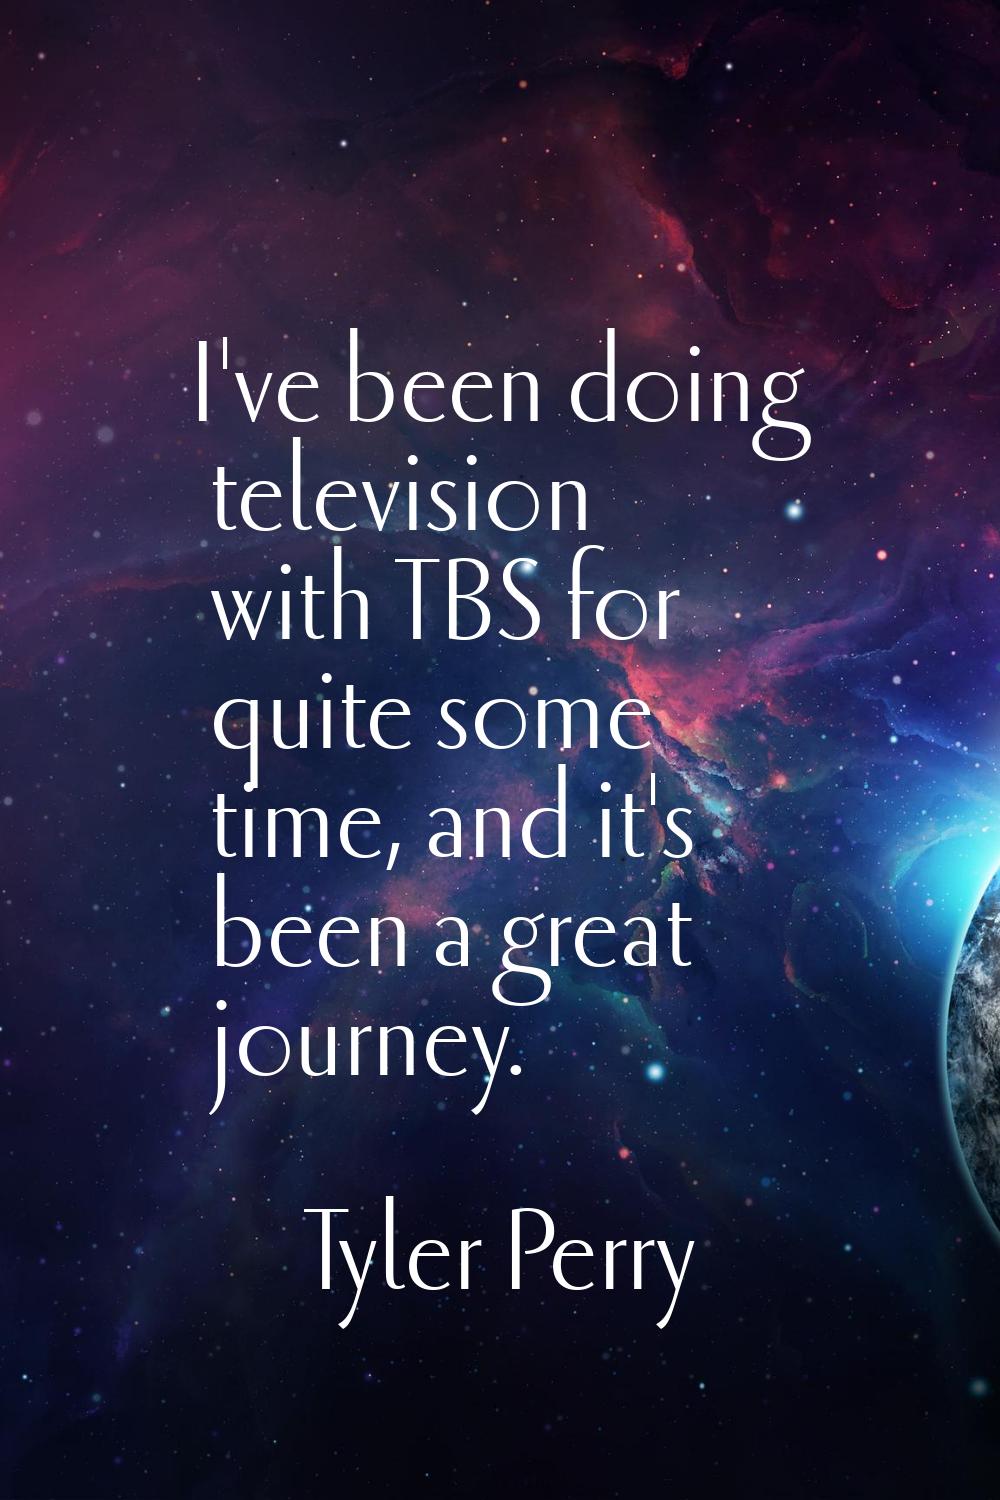 I've been doing television with TBS for quite some time, and it's been a great journey.